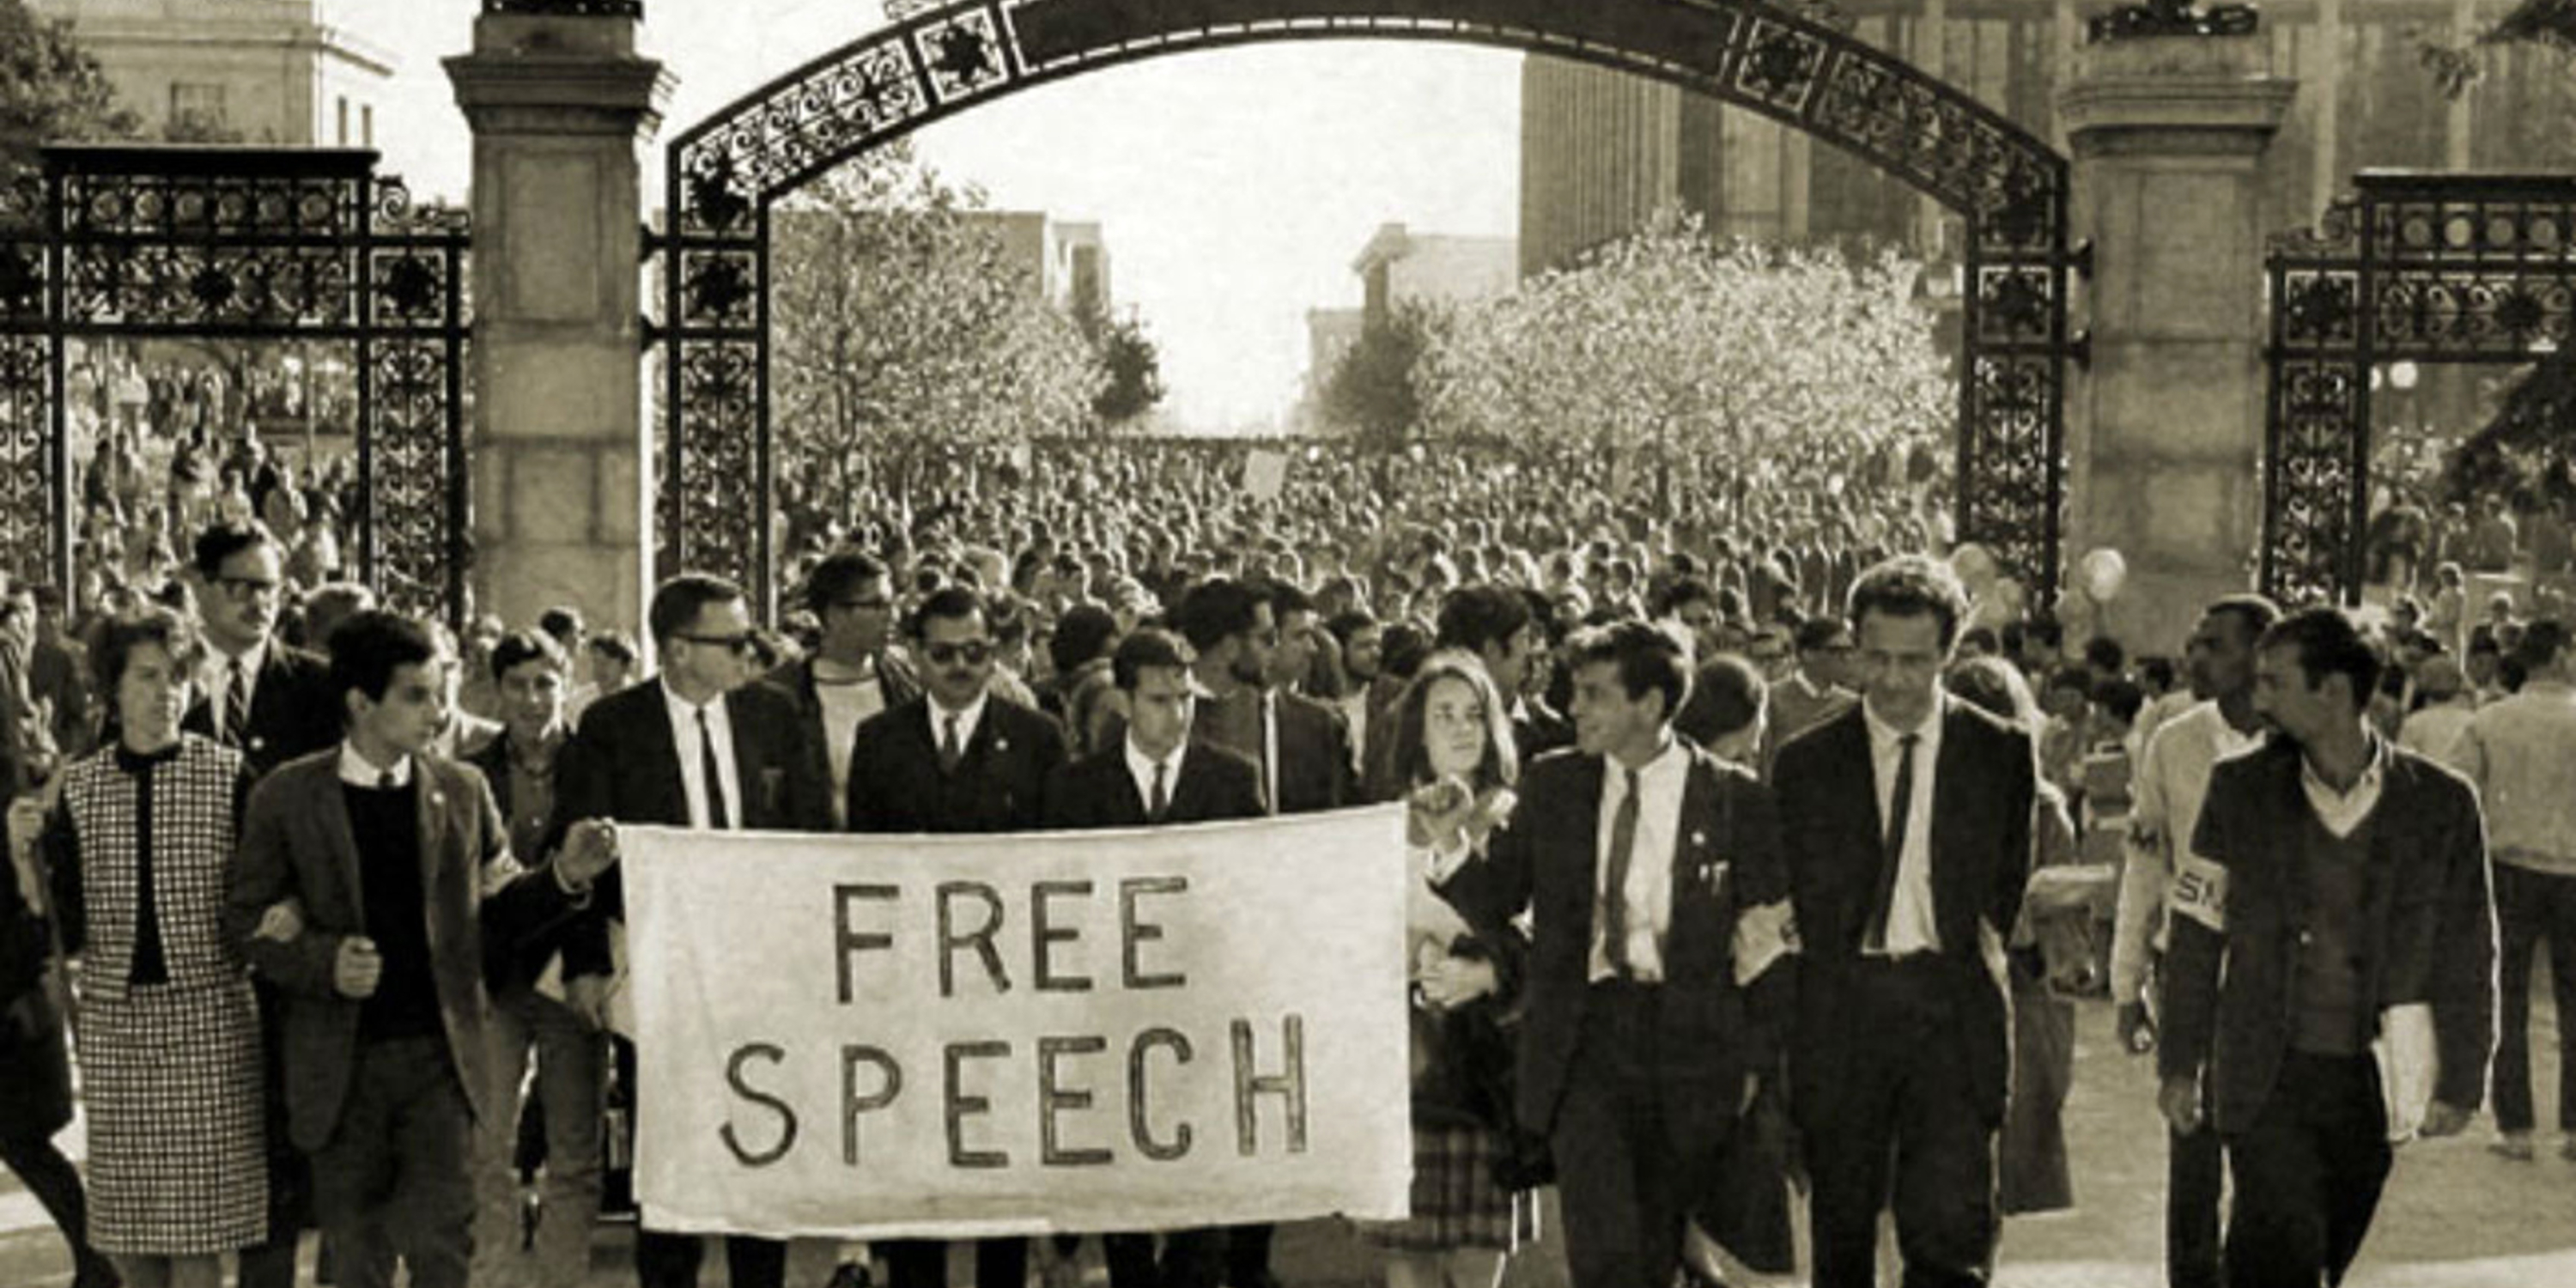 Free speech march at Ohio State University in the mid-20th century